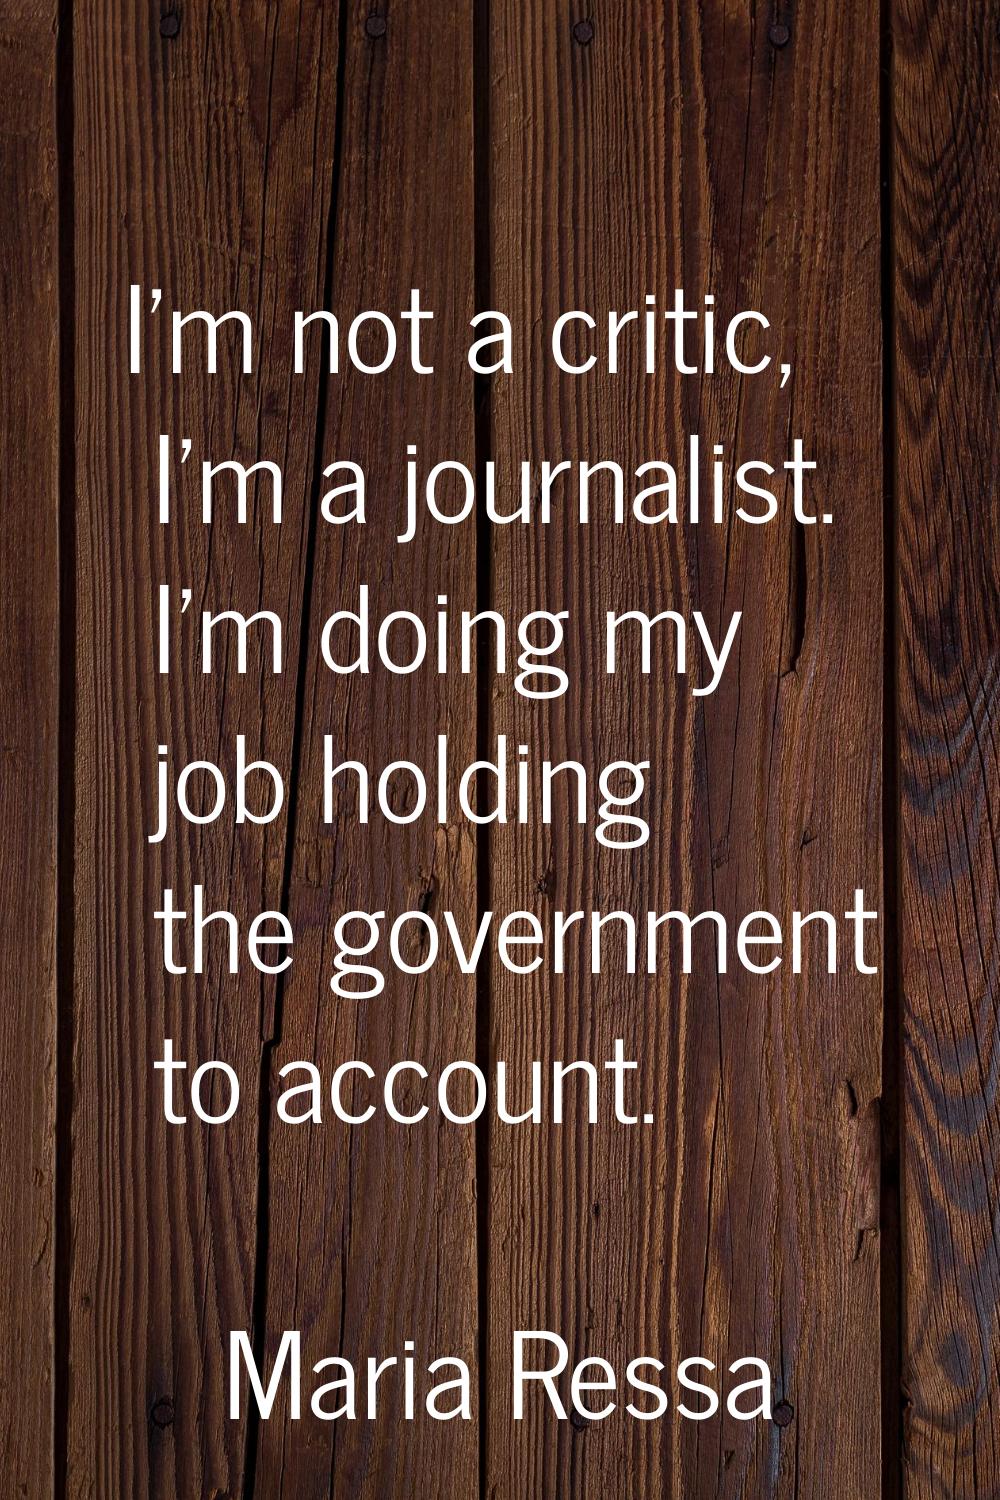 I'm not a critic, I'm a journalist. I'm doing my job holding the government to account.